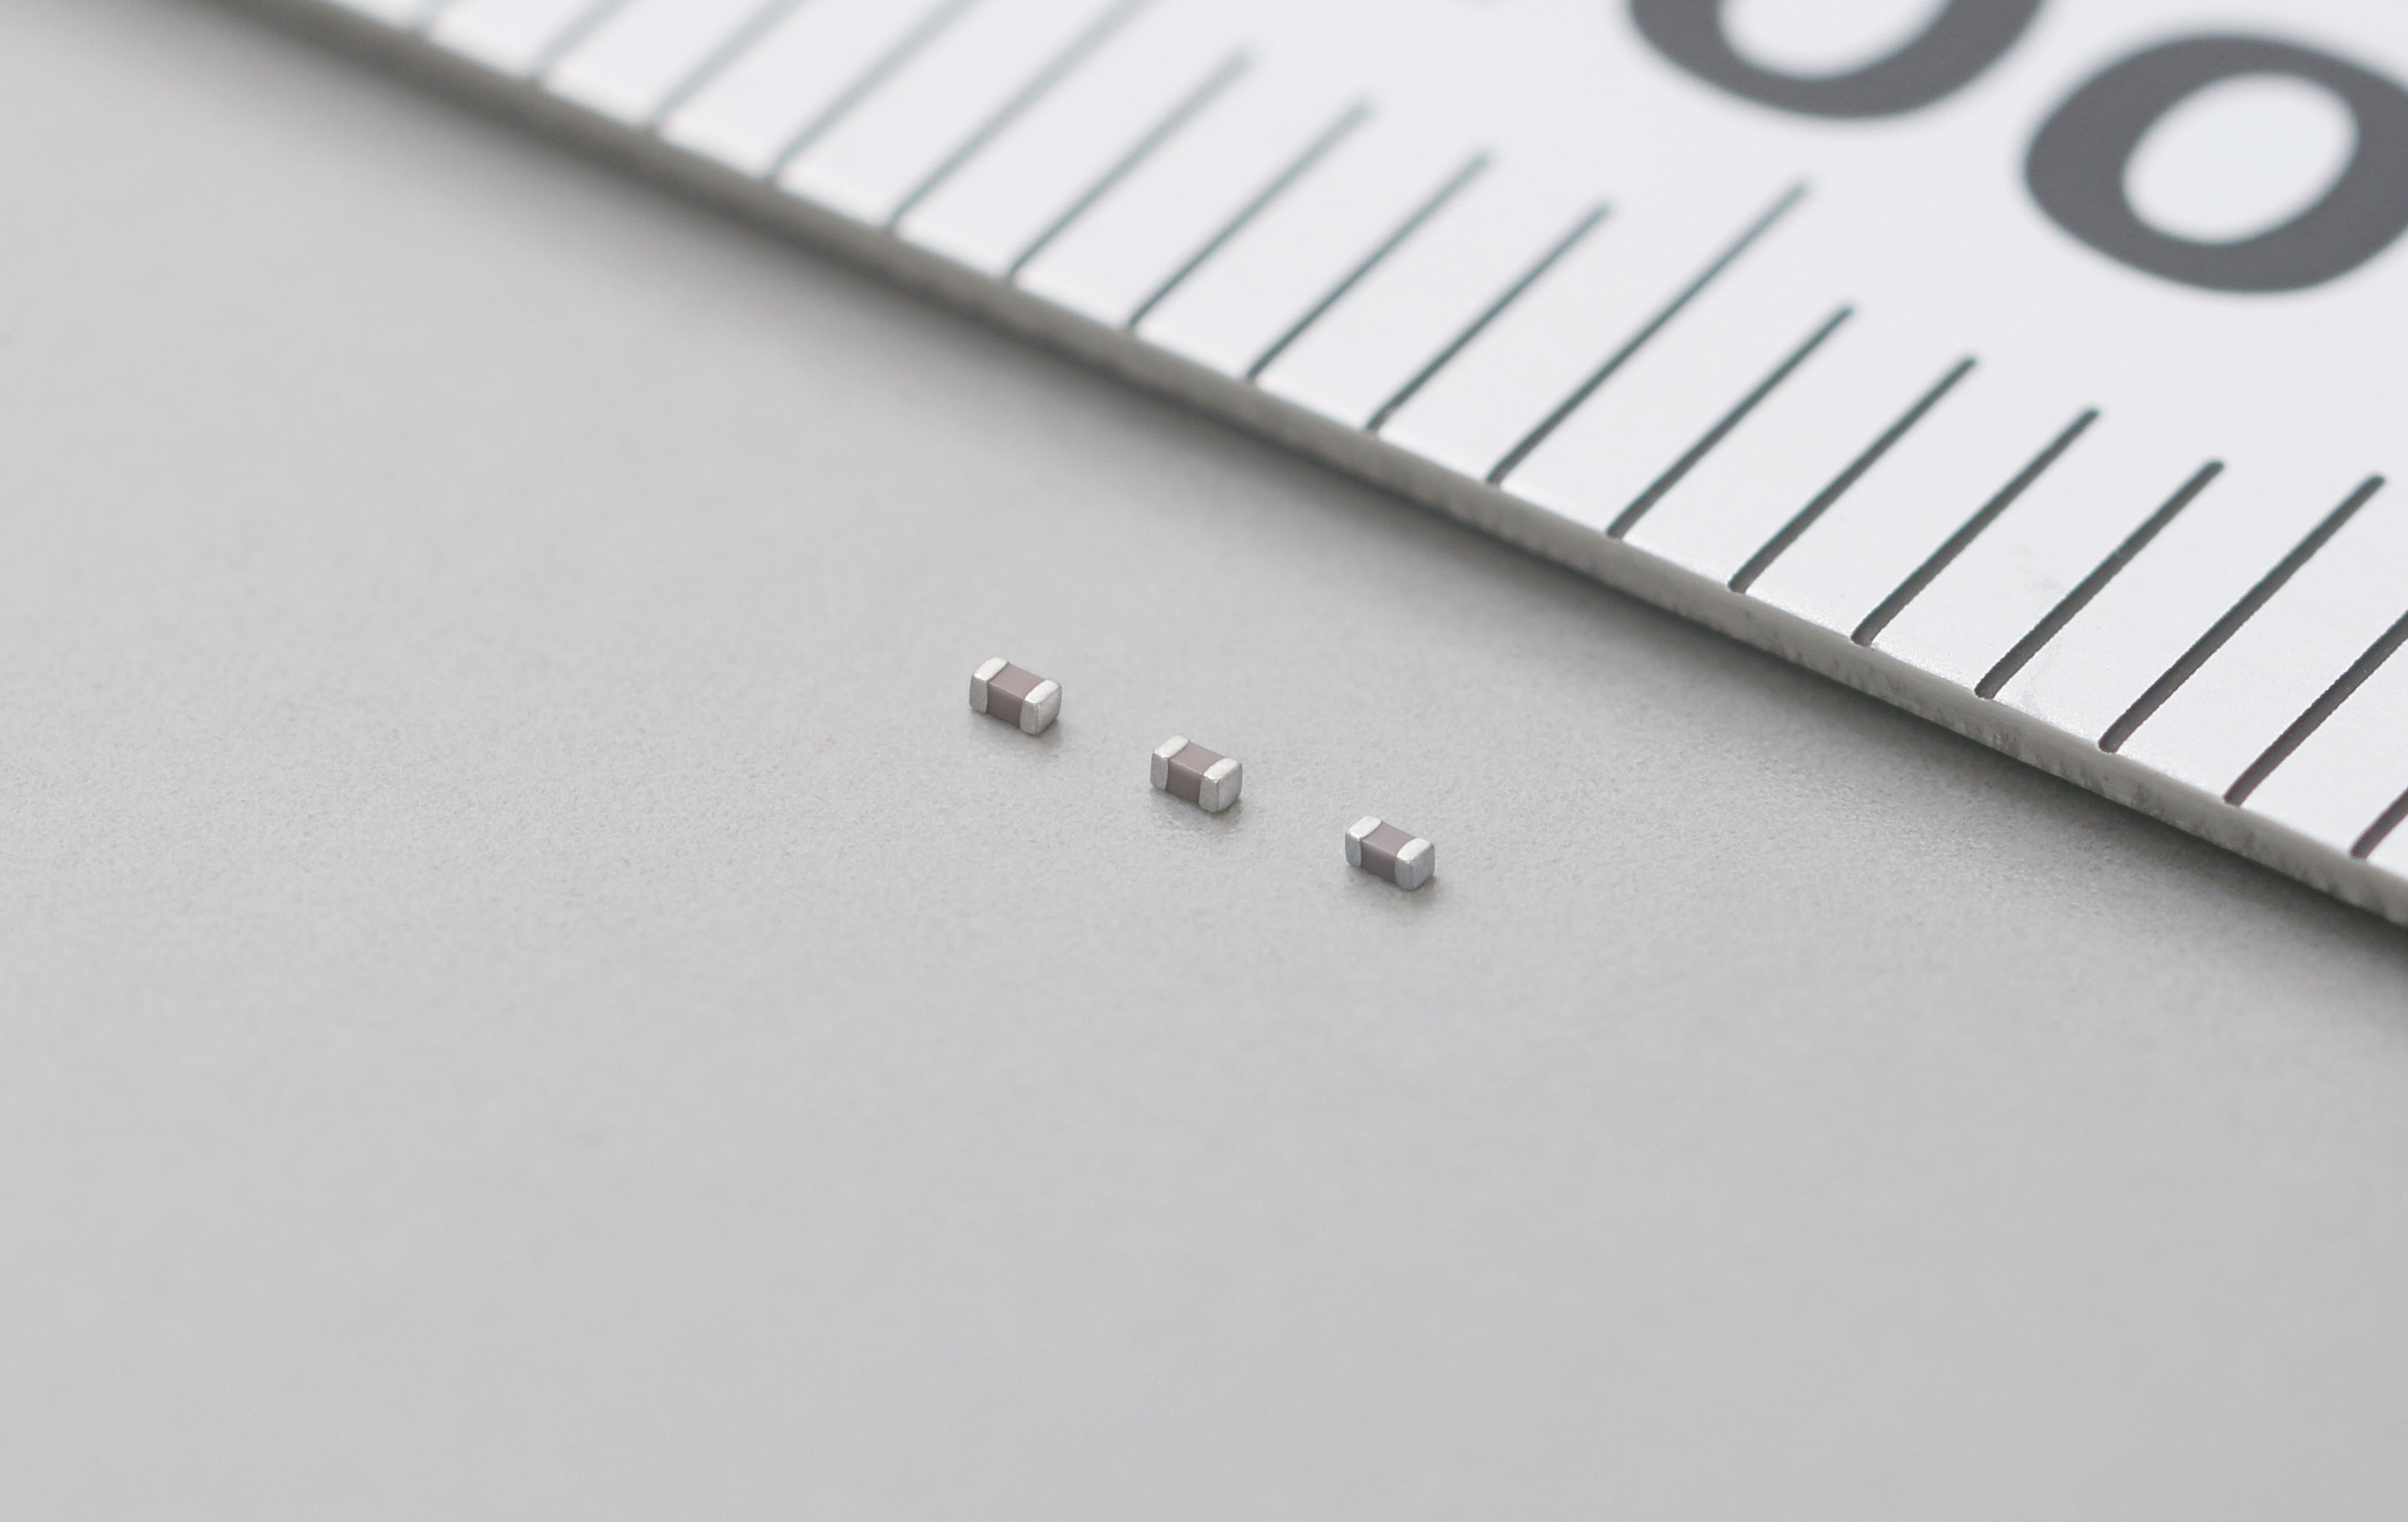 Murata introduces 0201 inch size 100 V low loss multilayer ceramic capacitor